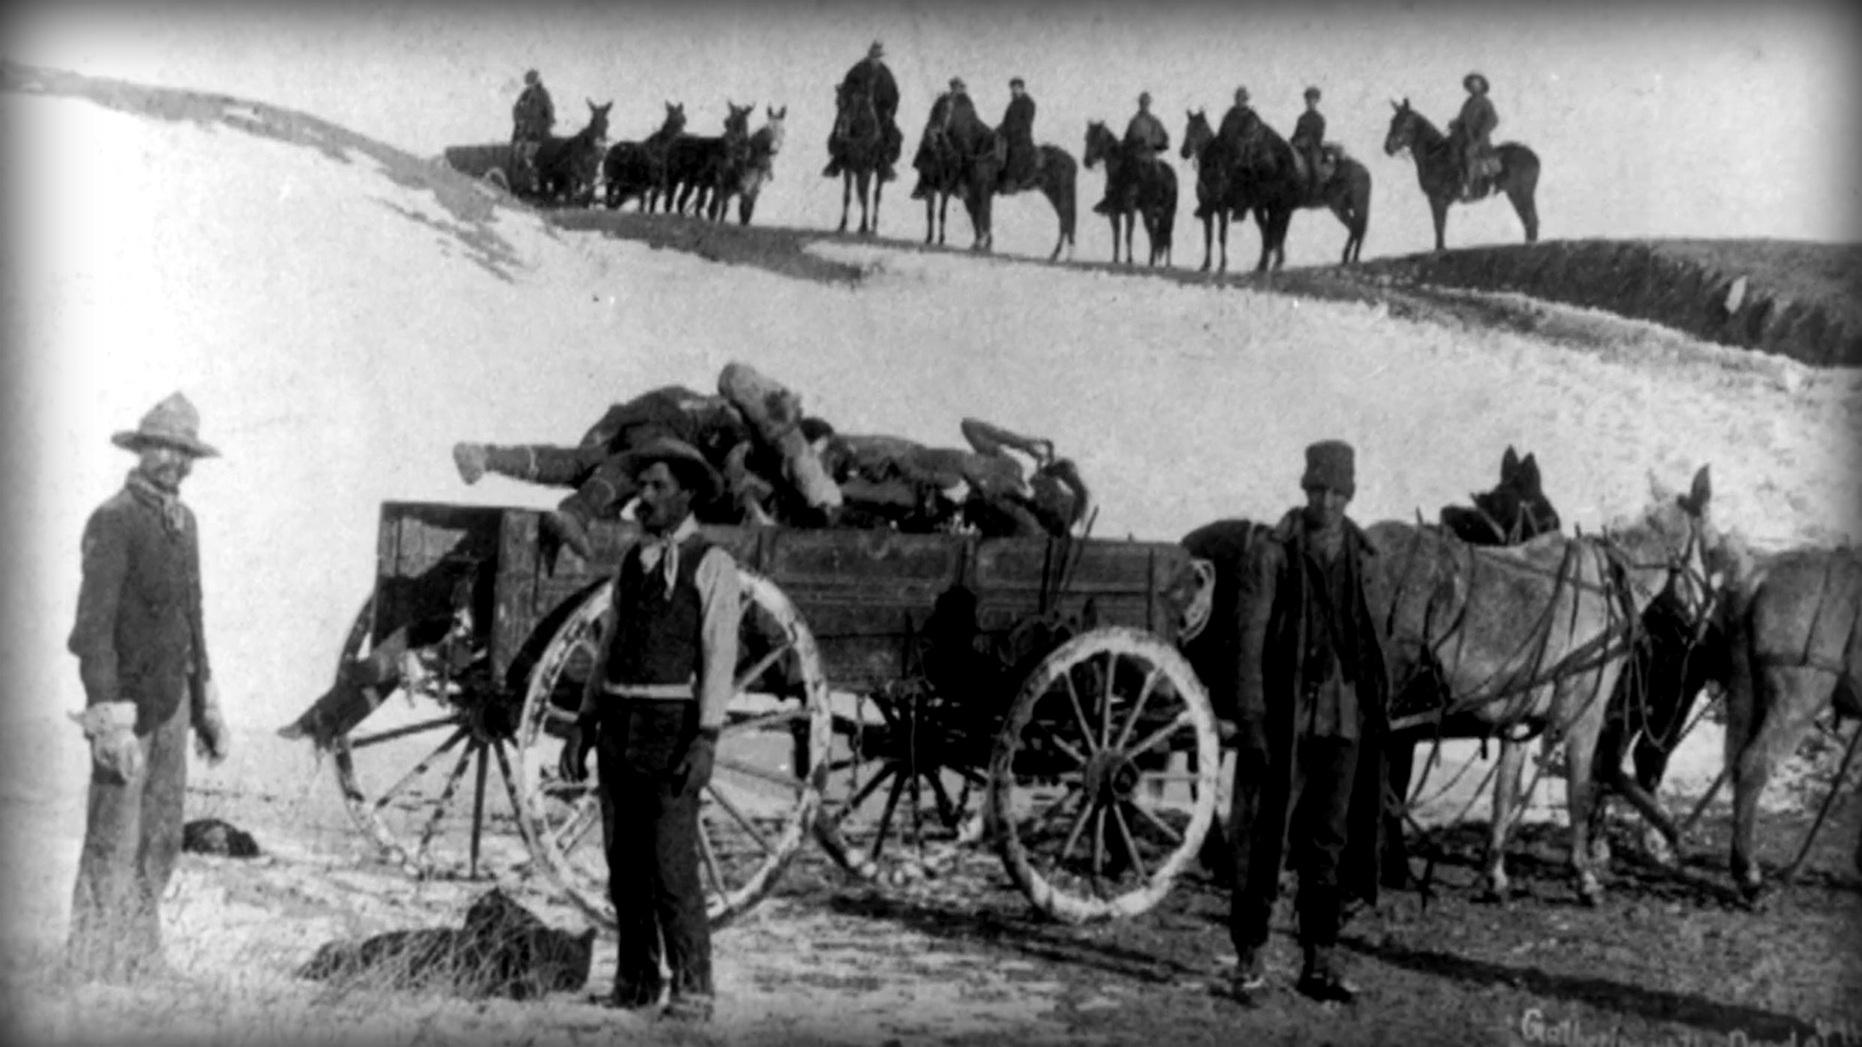 Archival image of three soldiers at the Wounded Knee Massacre site loading Native American bodies onto a horse drawn wagon.  Additional soldiers are on horseback in the background. 